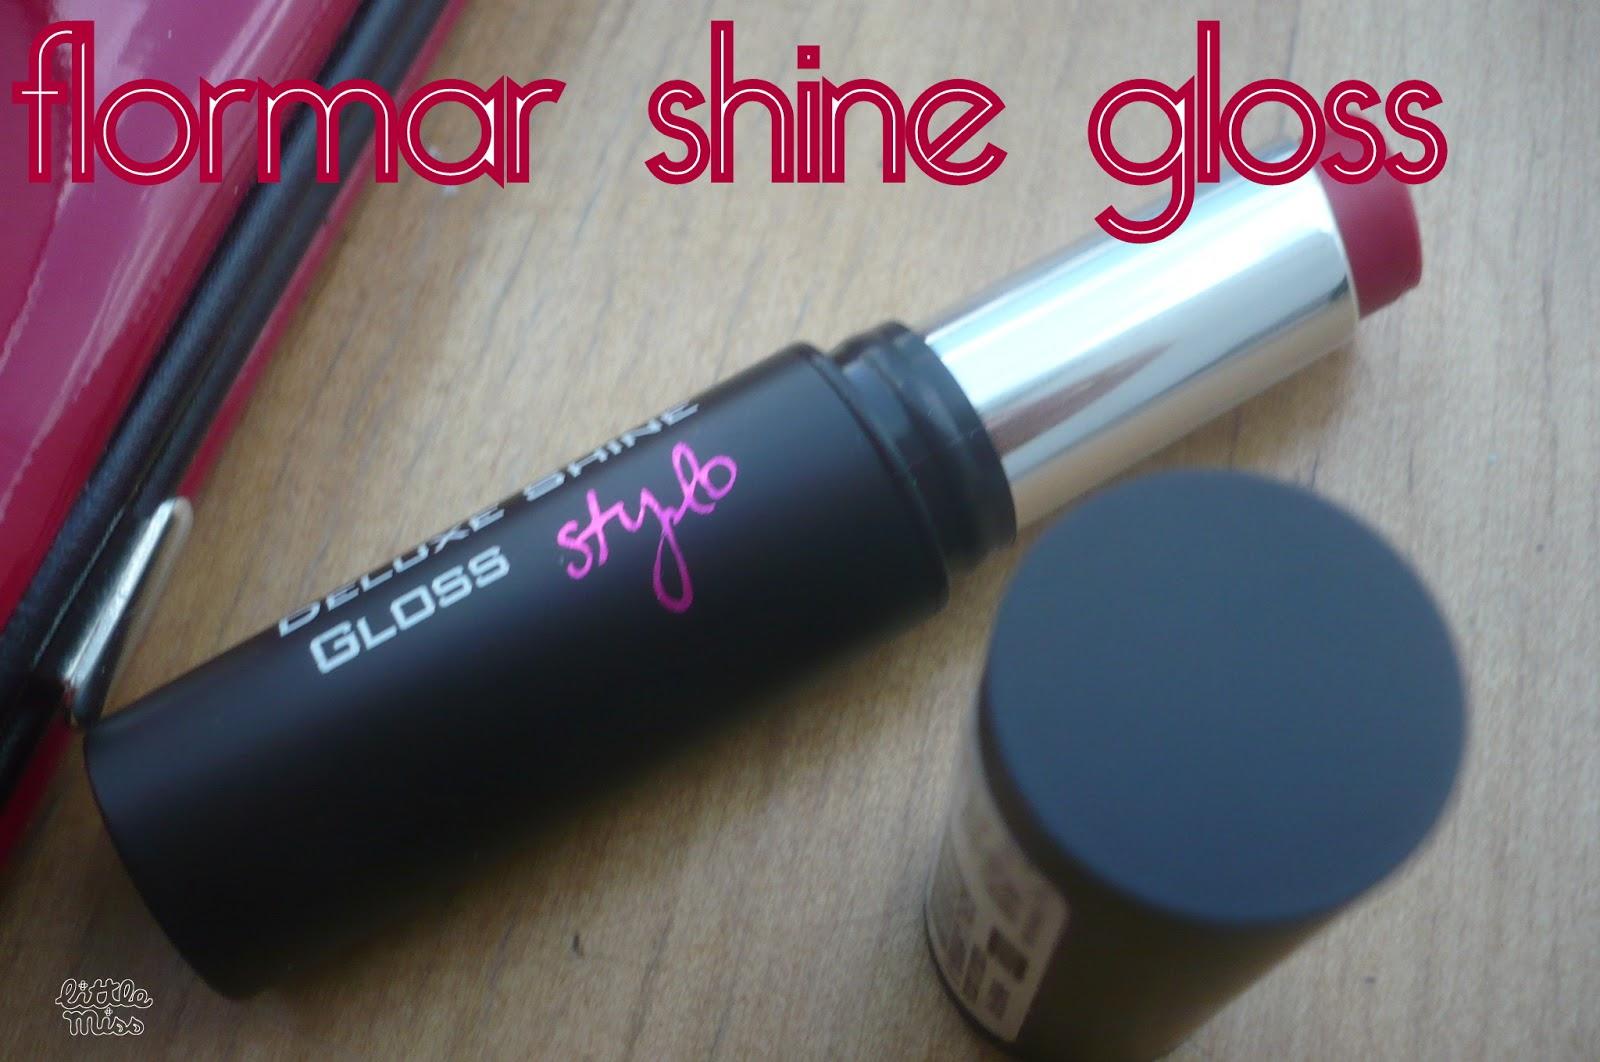 Flormar Deluxe Shine Gloss Lipstick - D34 | Review | Photos | Swatches